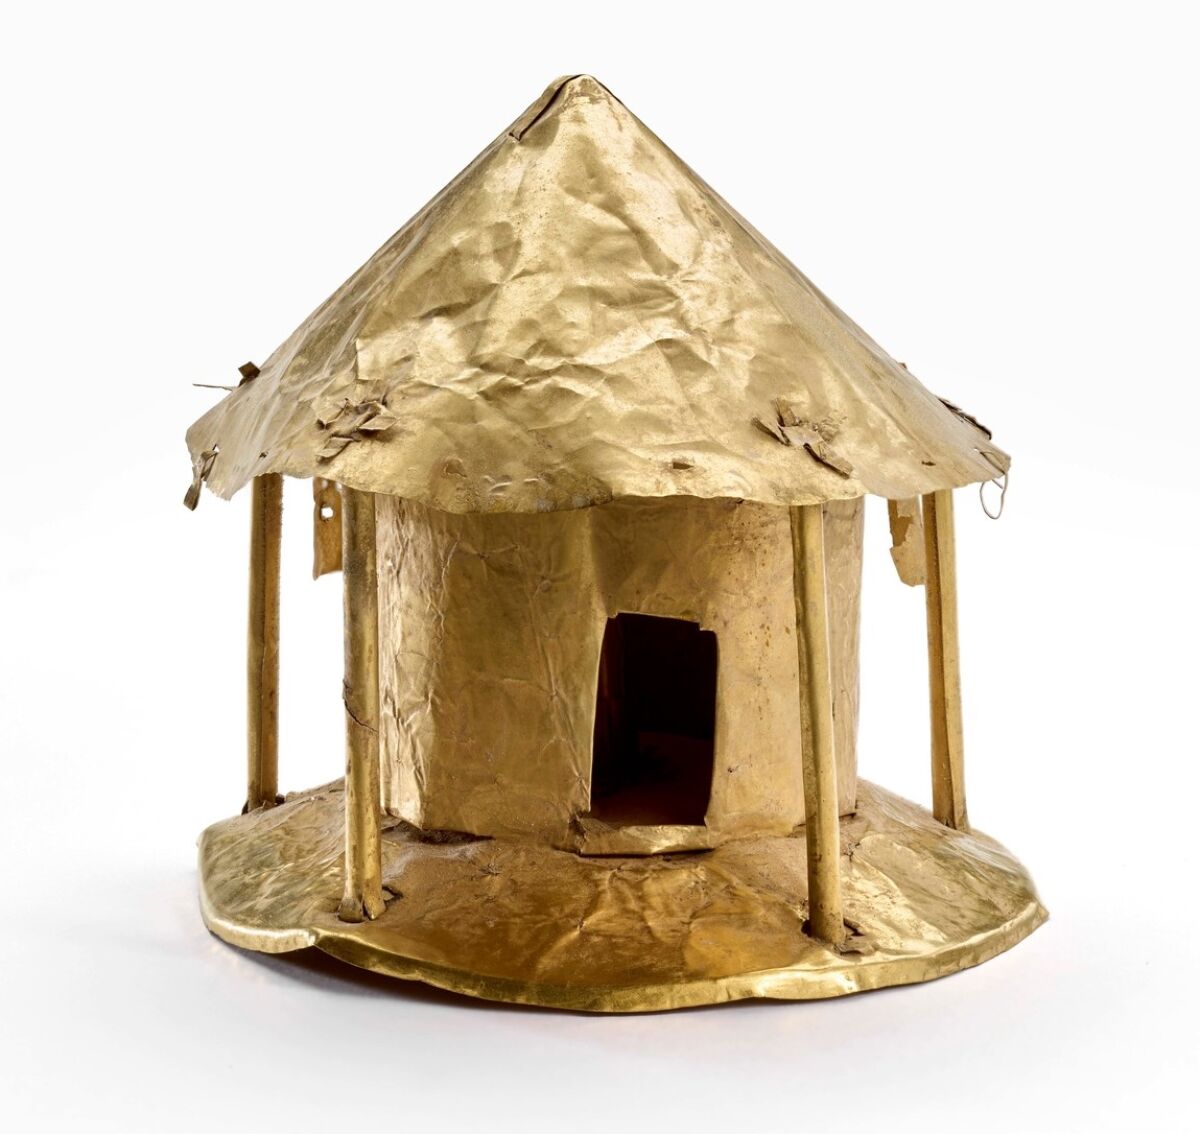 A model of a circular house made of gold alloy.